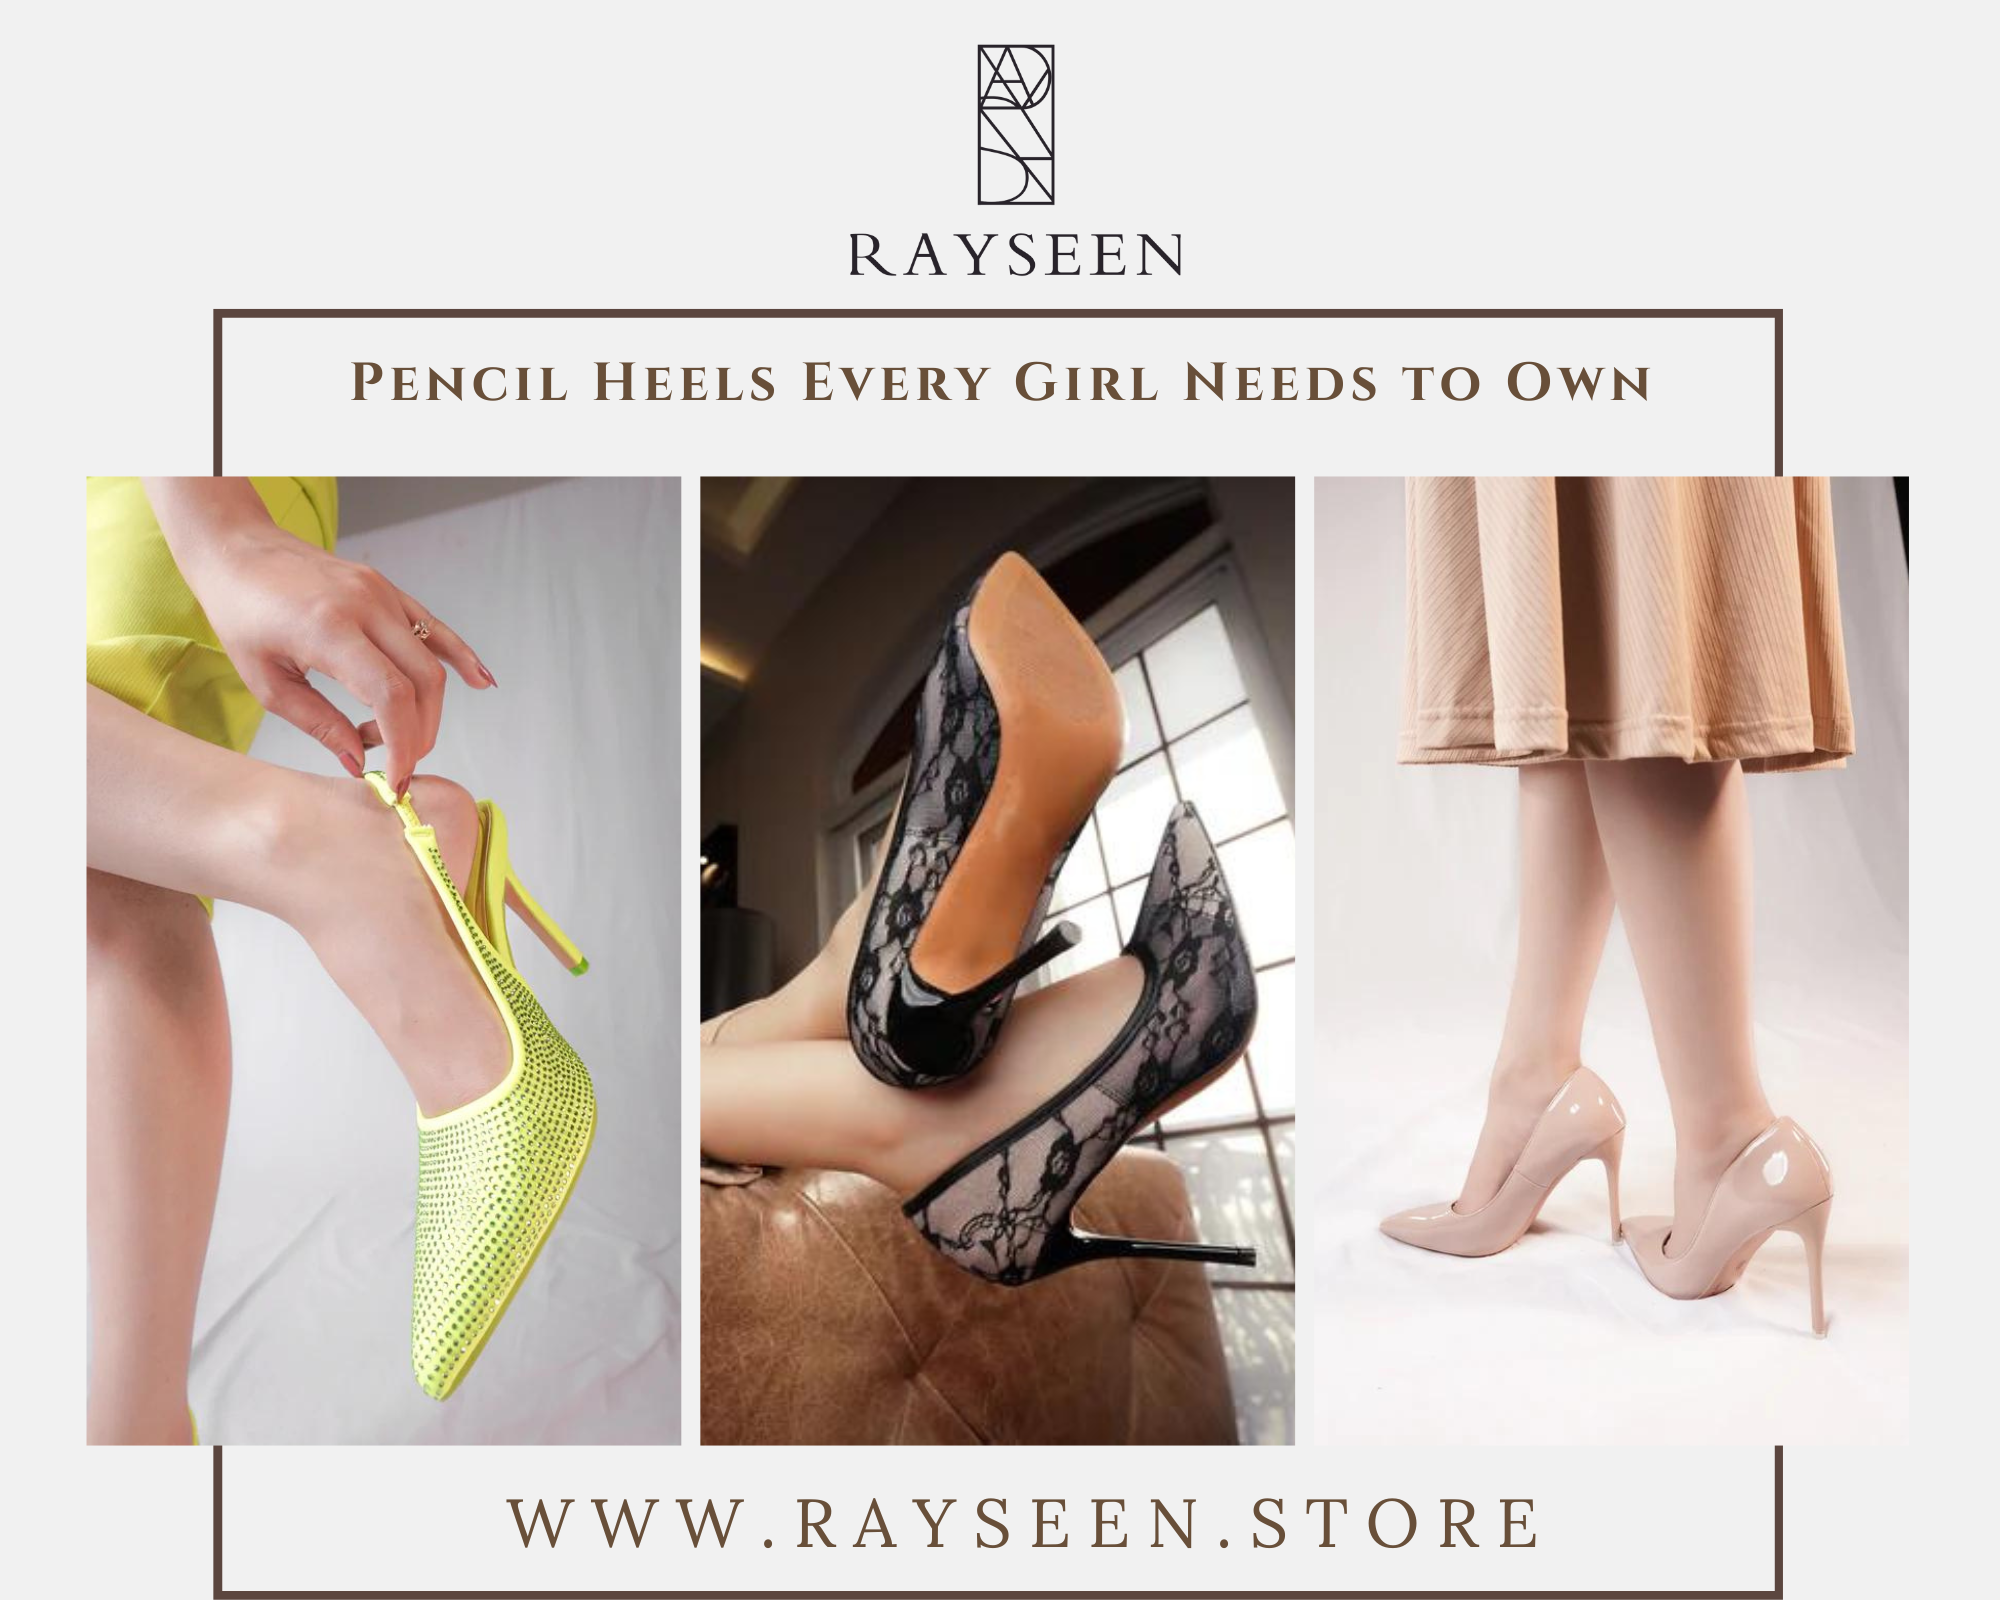 Pencil Heels Every Girl Needs to Own